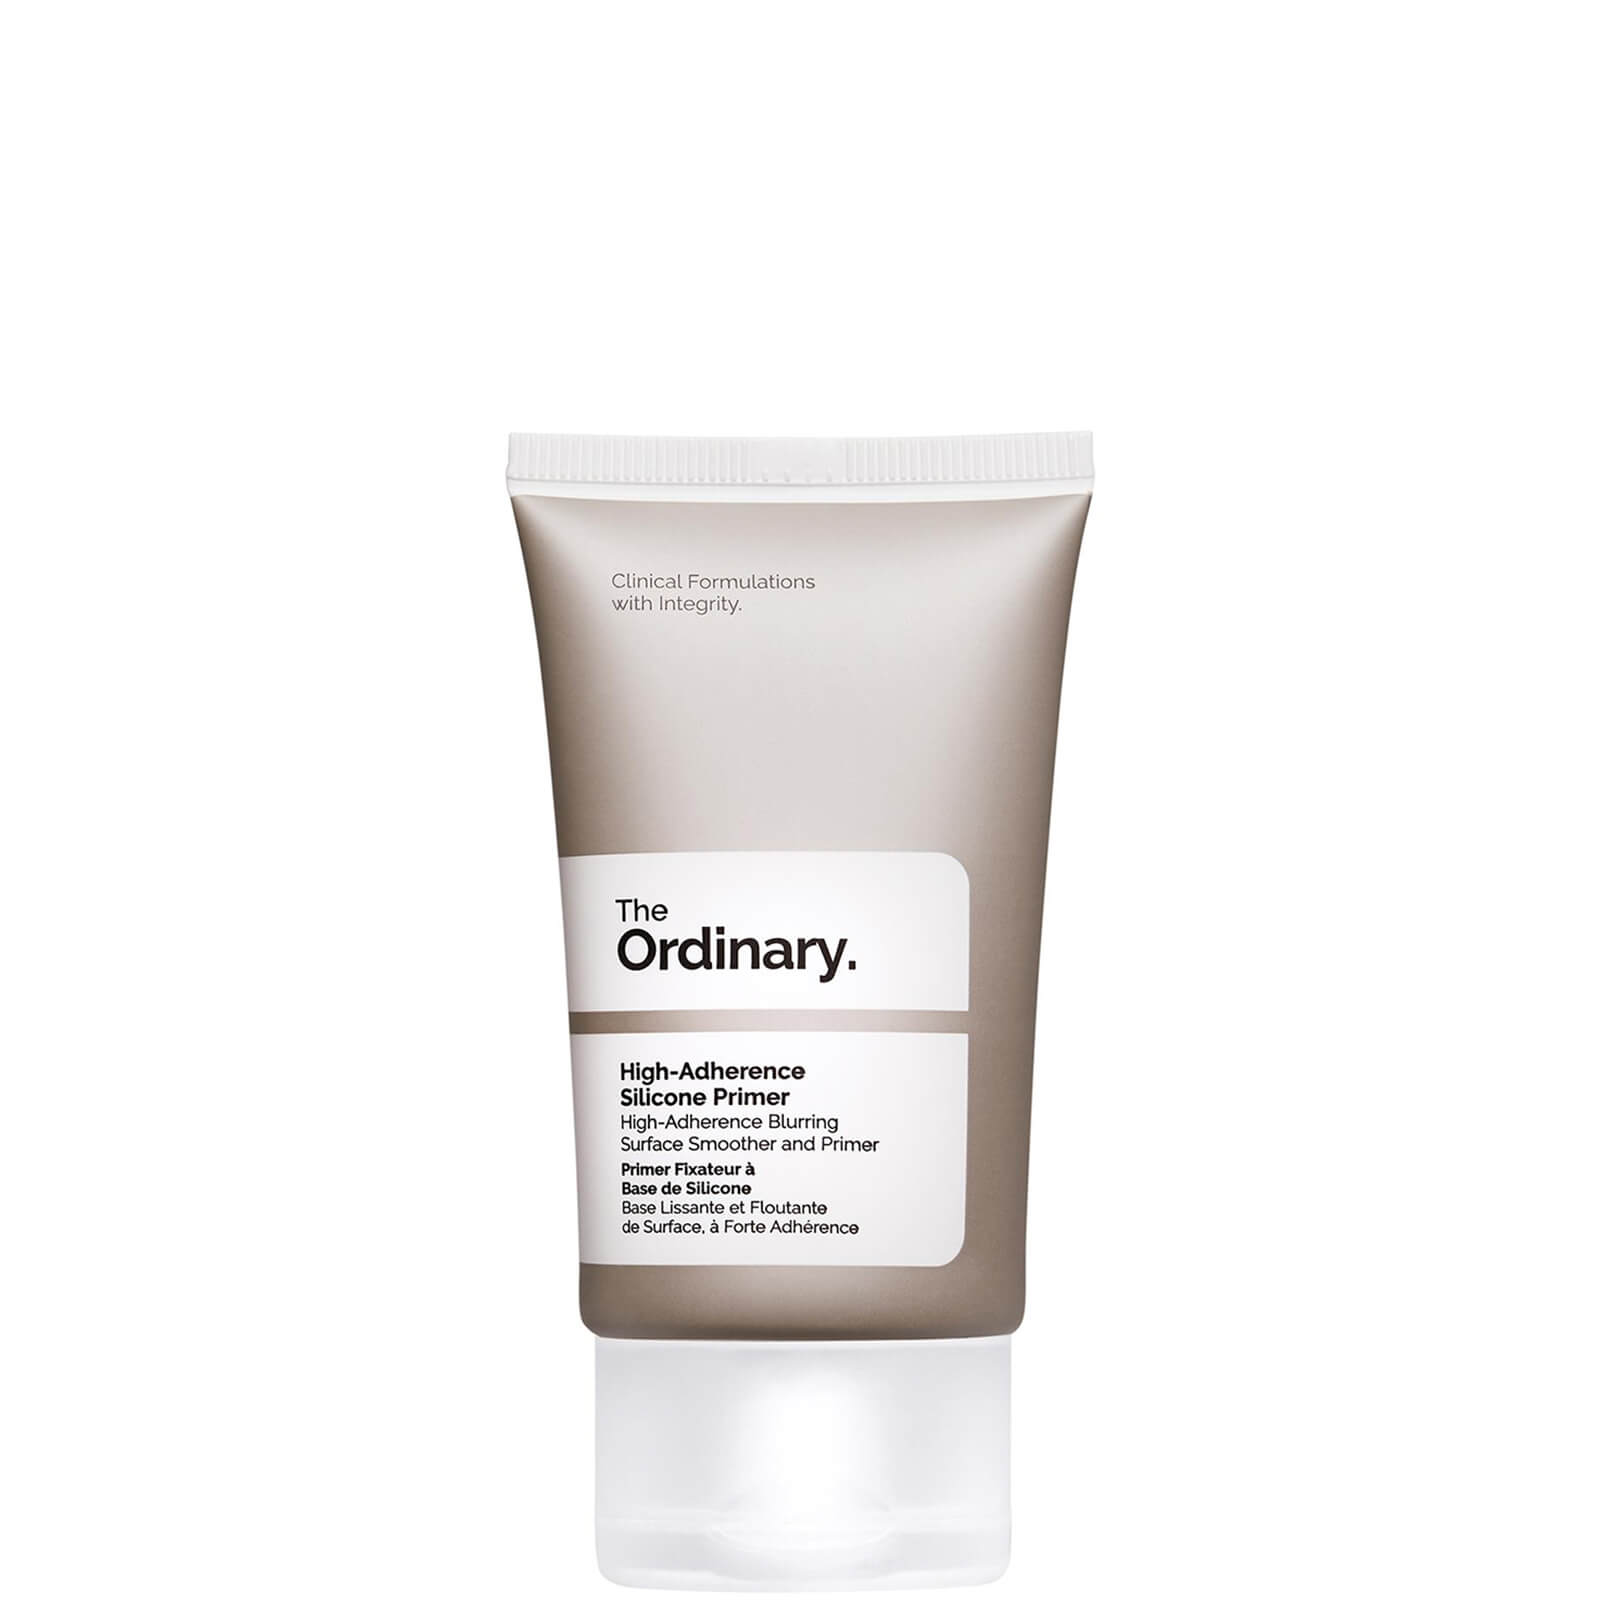 The Ordinary Hydrators and Oils High-Adherence Silicone Primer